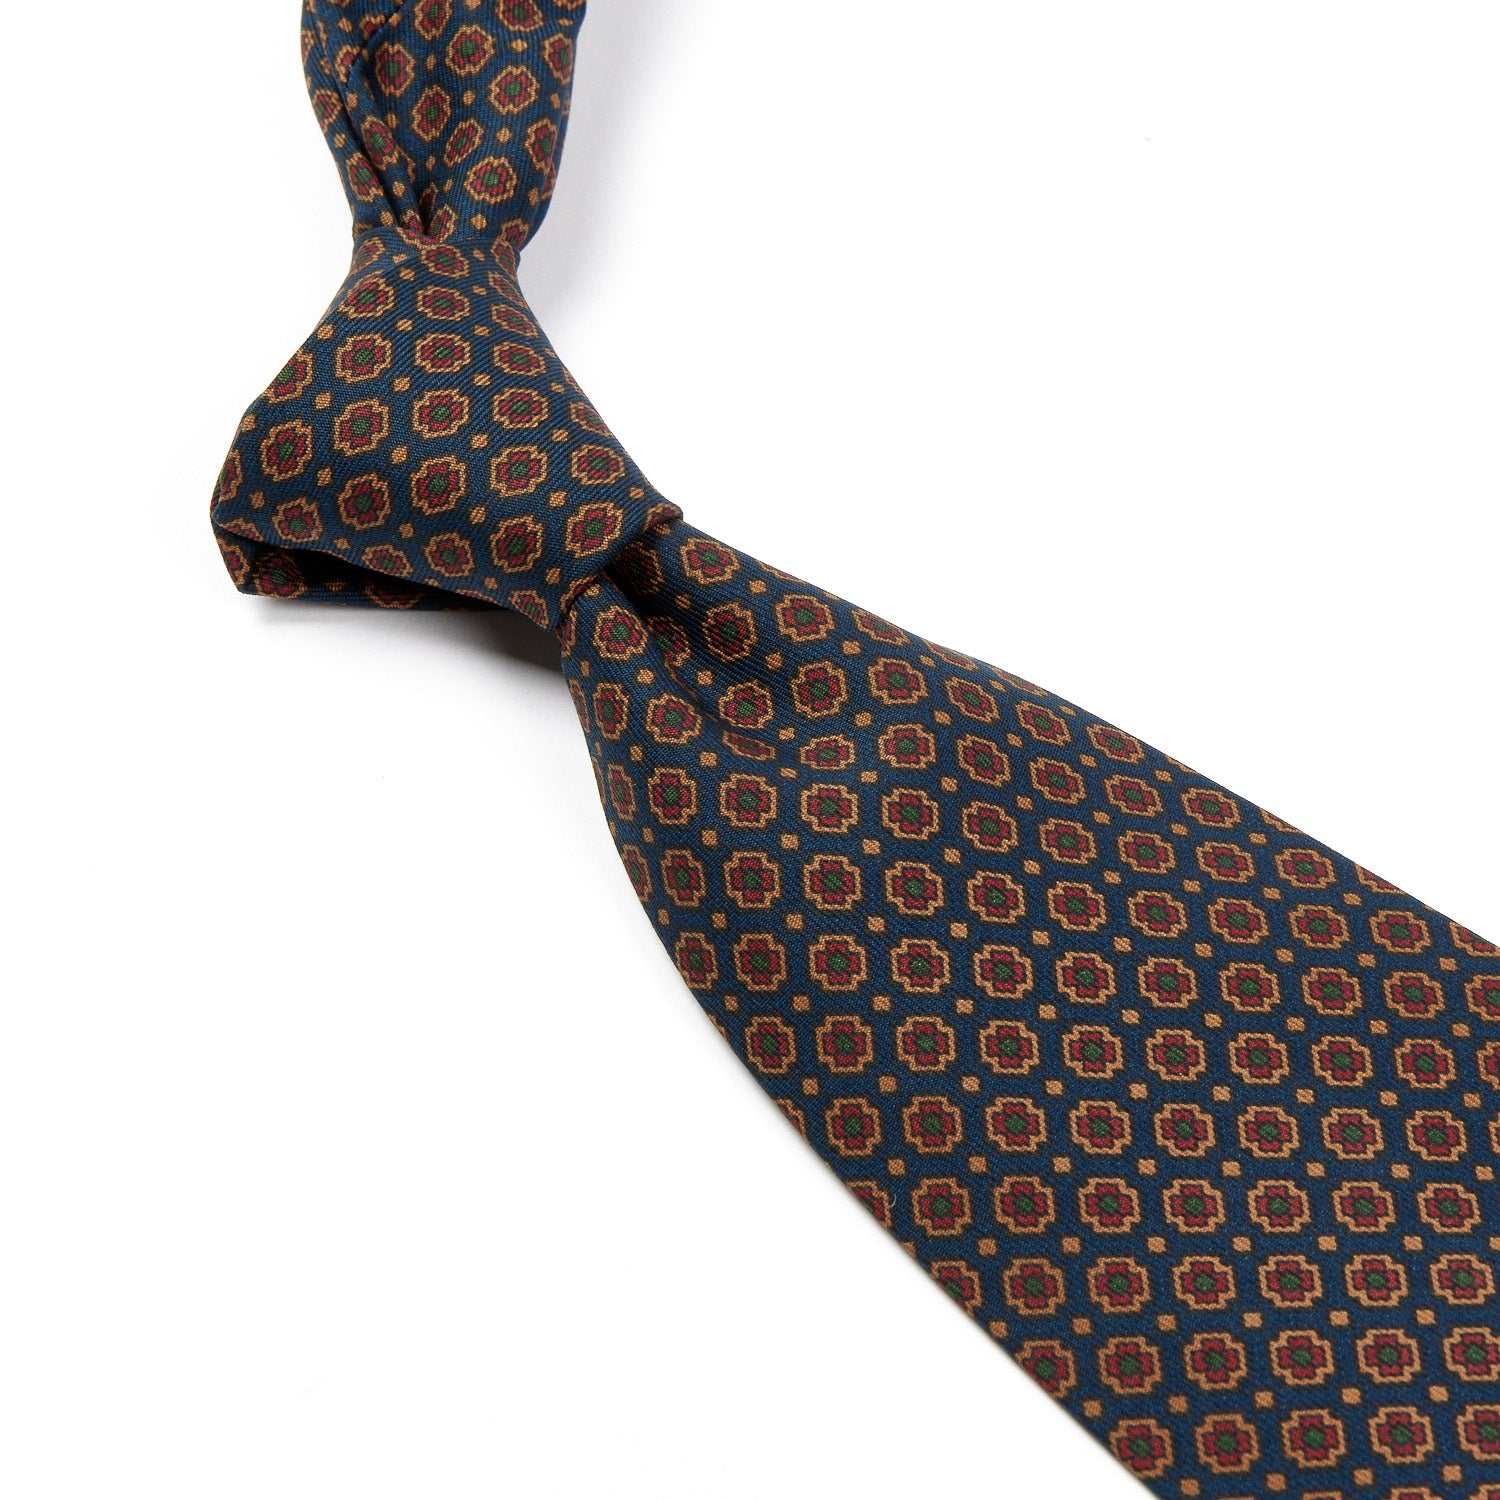 A Sovereign Grade Dark Navy Small Floral Ancient Madder Tie with an orange and brown pattern, handmade in the United Kingdom by KirbyAllison.com.